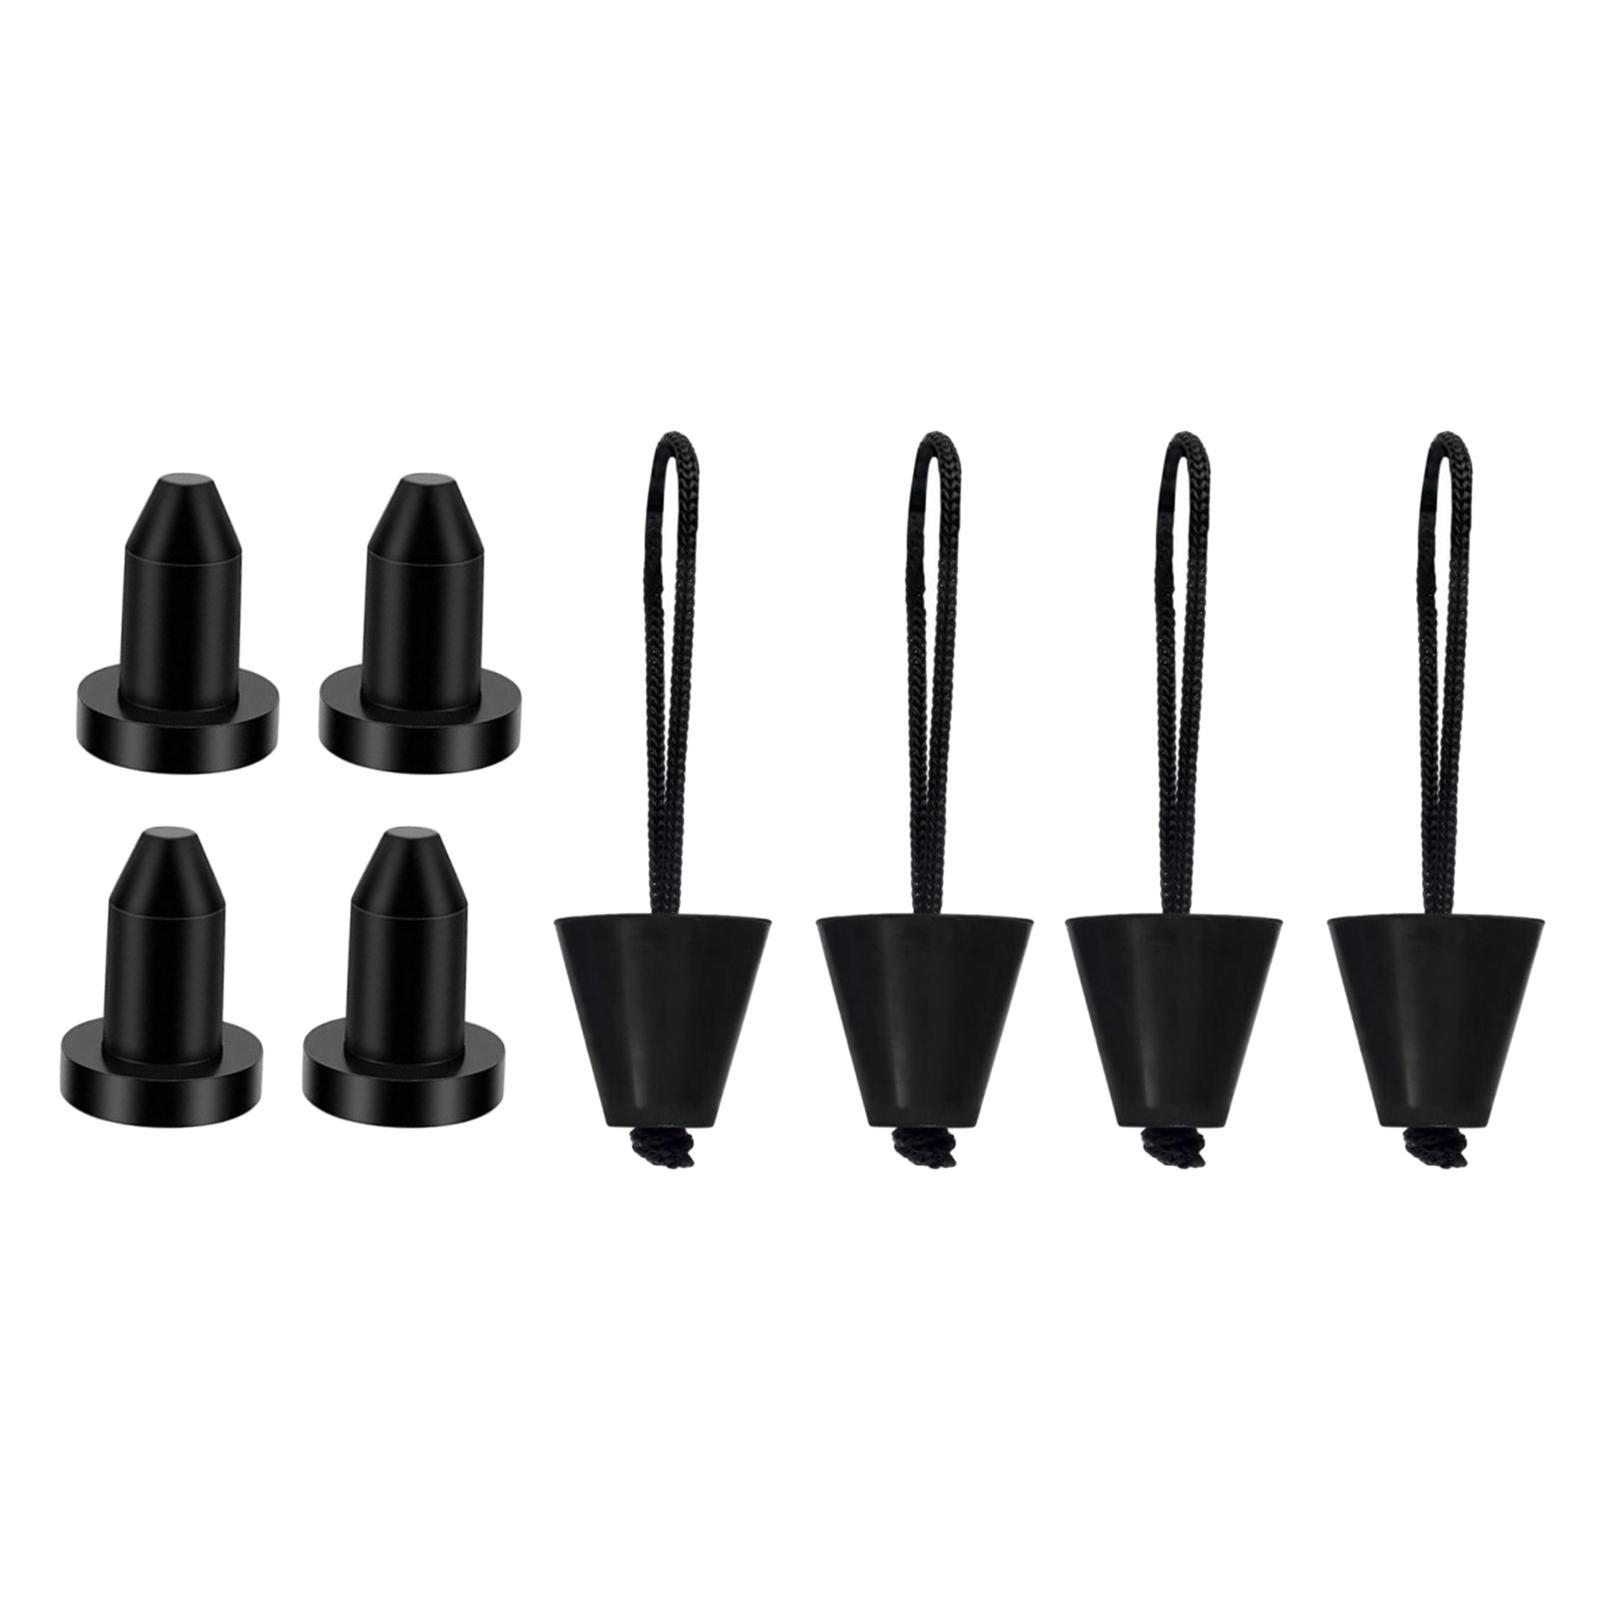 8x Kayak Scupper Plug  Kayak Drain Plug Accessories Supplies Silicone Drain Holes Stopper Bung for Raft Fishing Boat Canoe